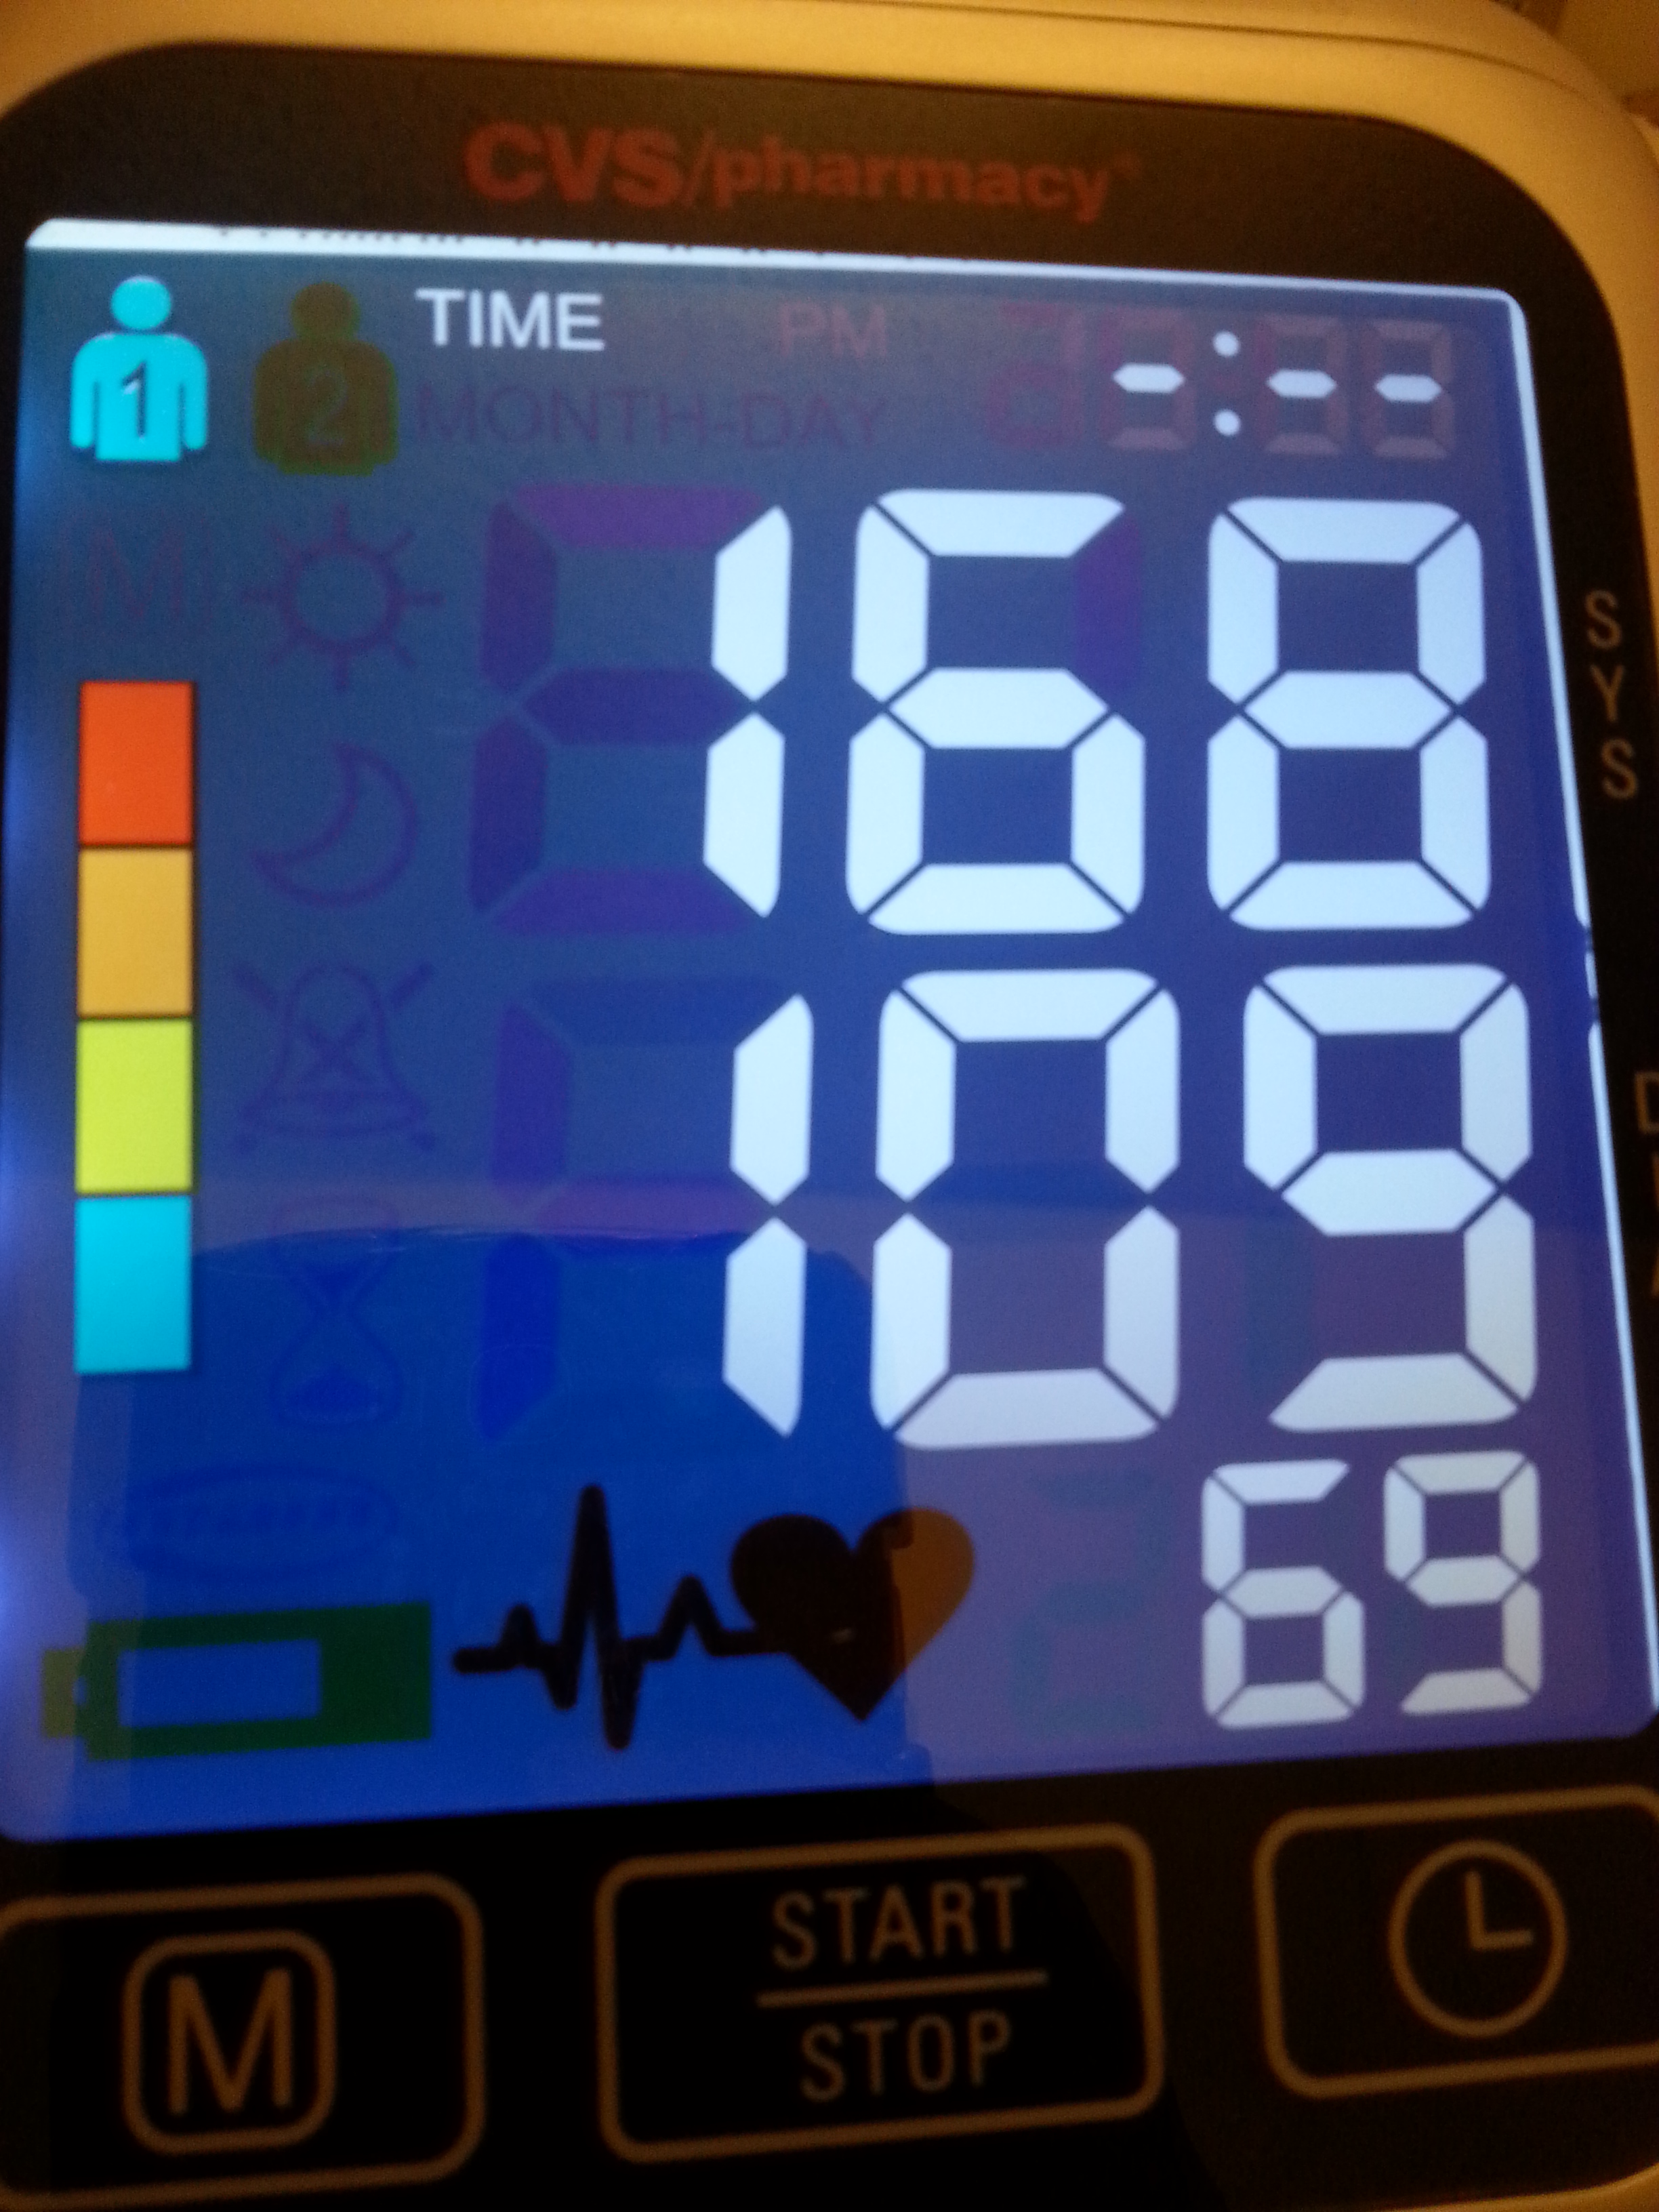 What are dangerous blood pressure readings?